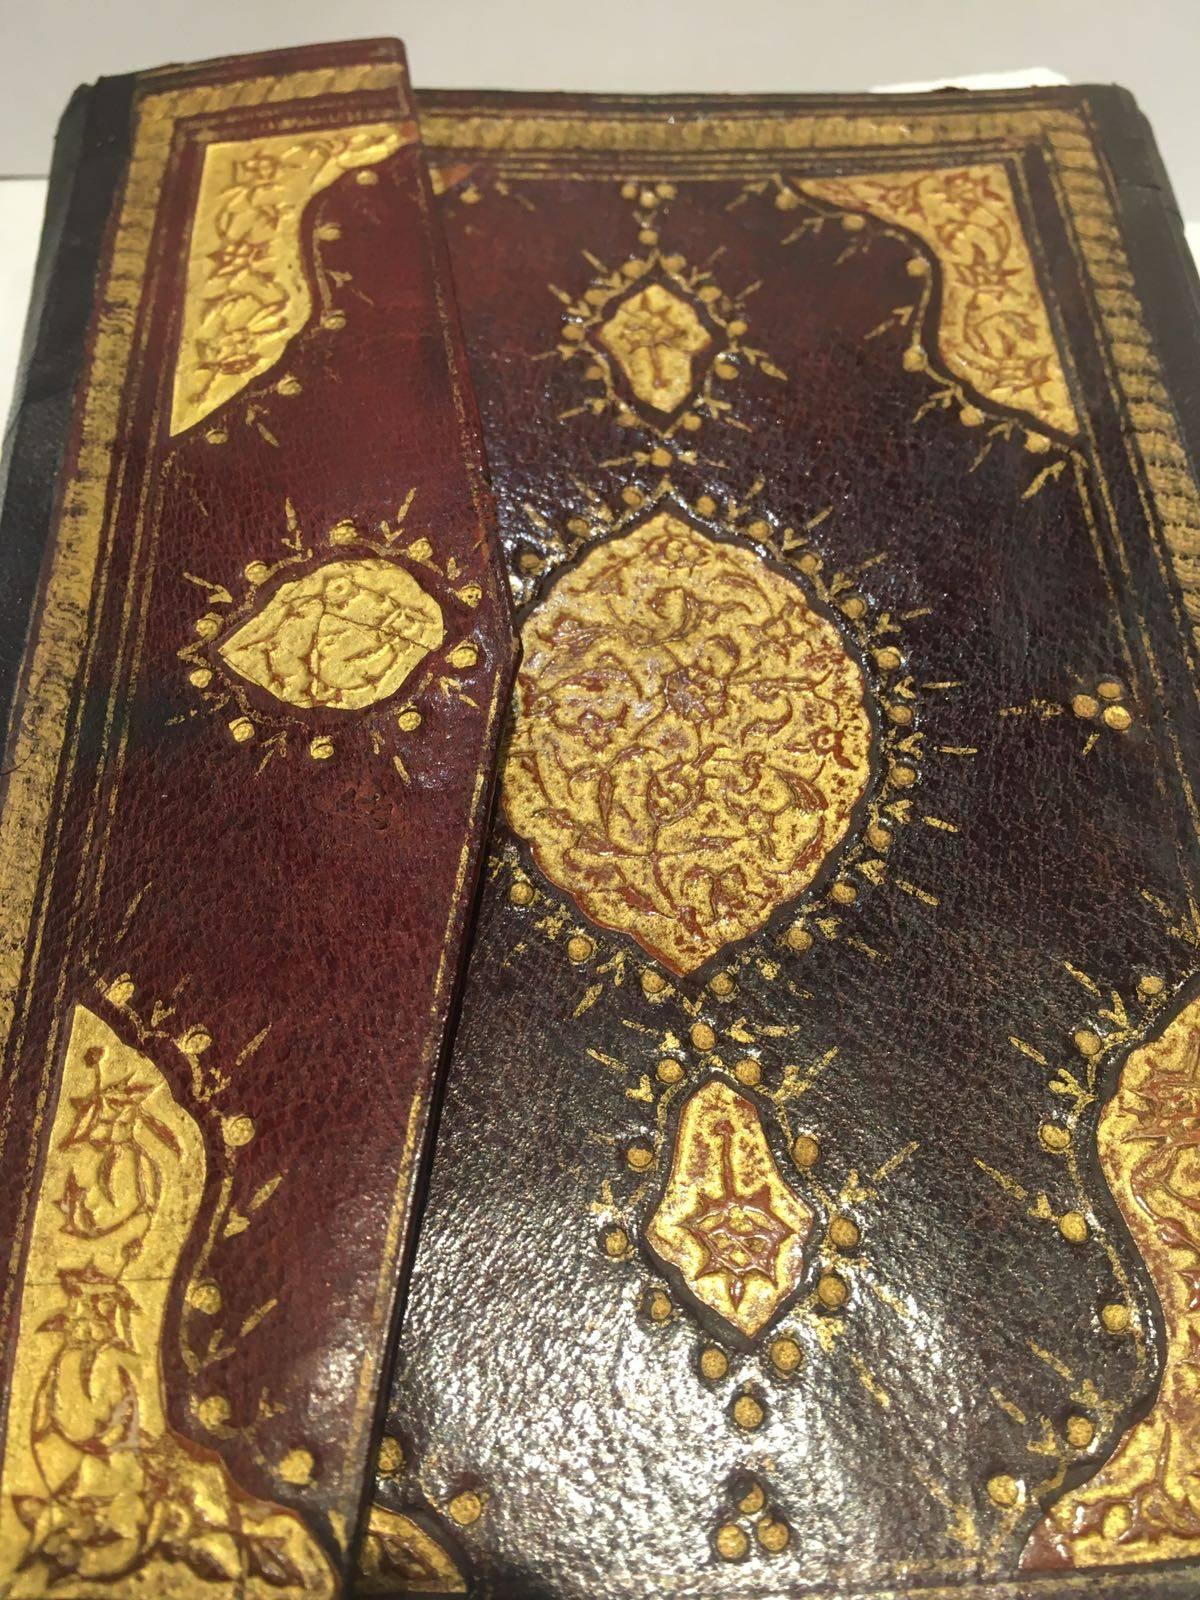 Beautiful Turkish Quran signed and dated 1233 Hijri

Measure: Length 13cm
Height 3.5cm.